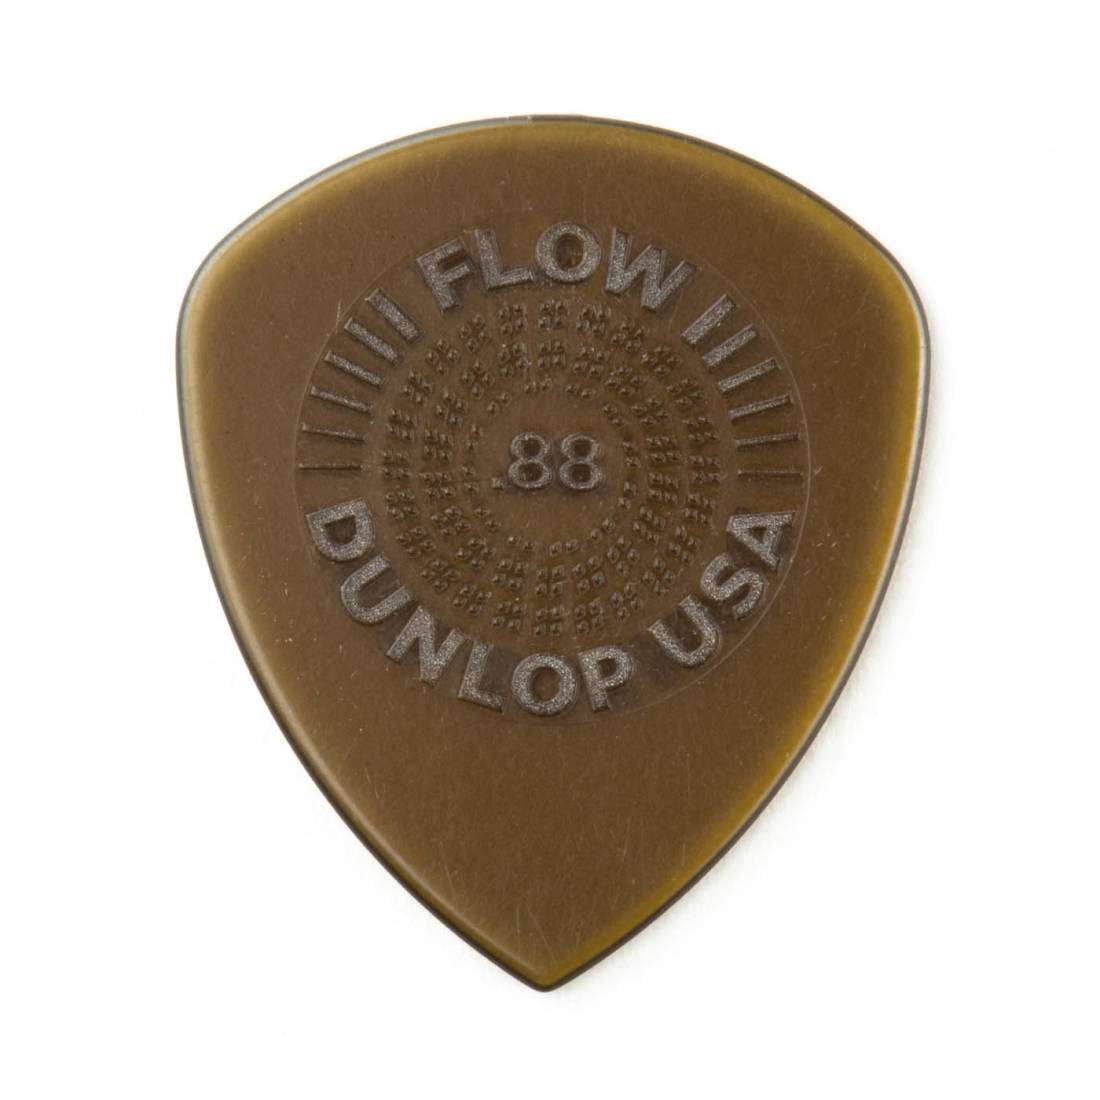 Flow Standard Pick Players Pack (6 Pieces) - 0.88mm